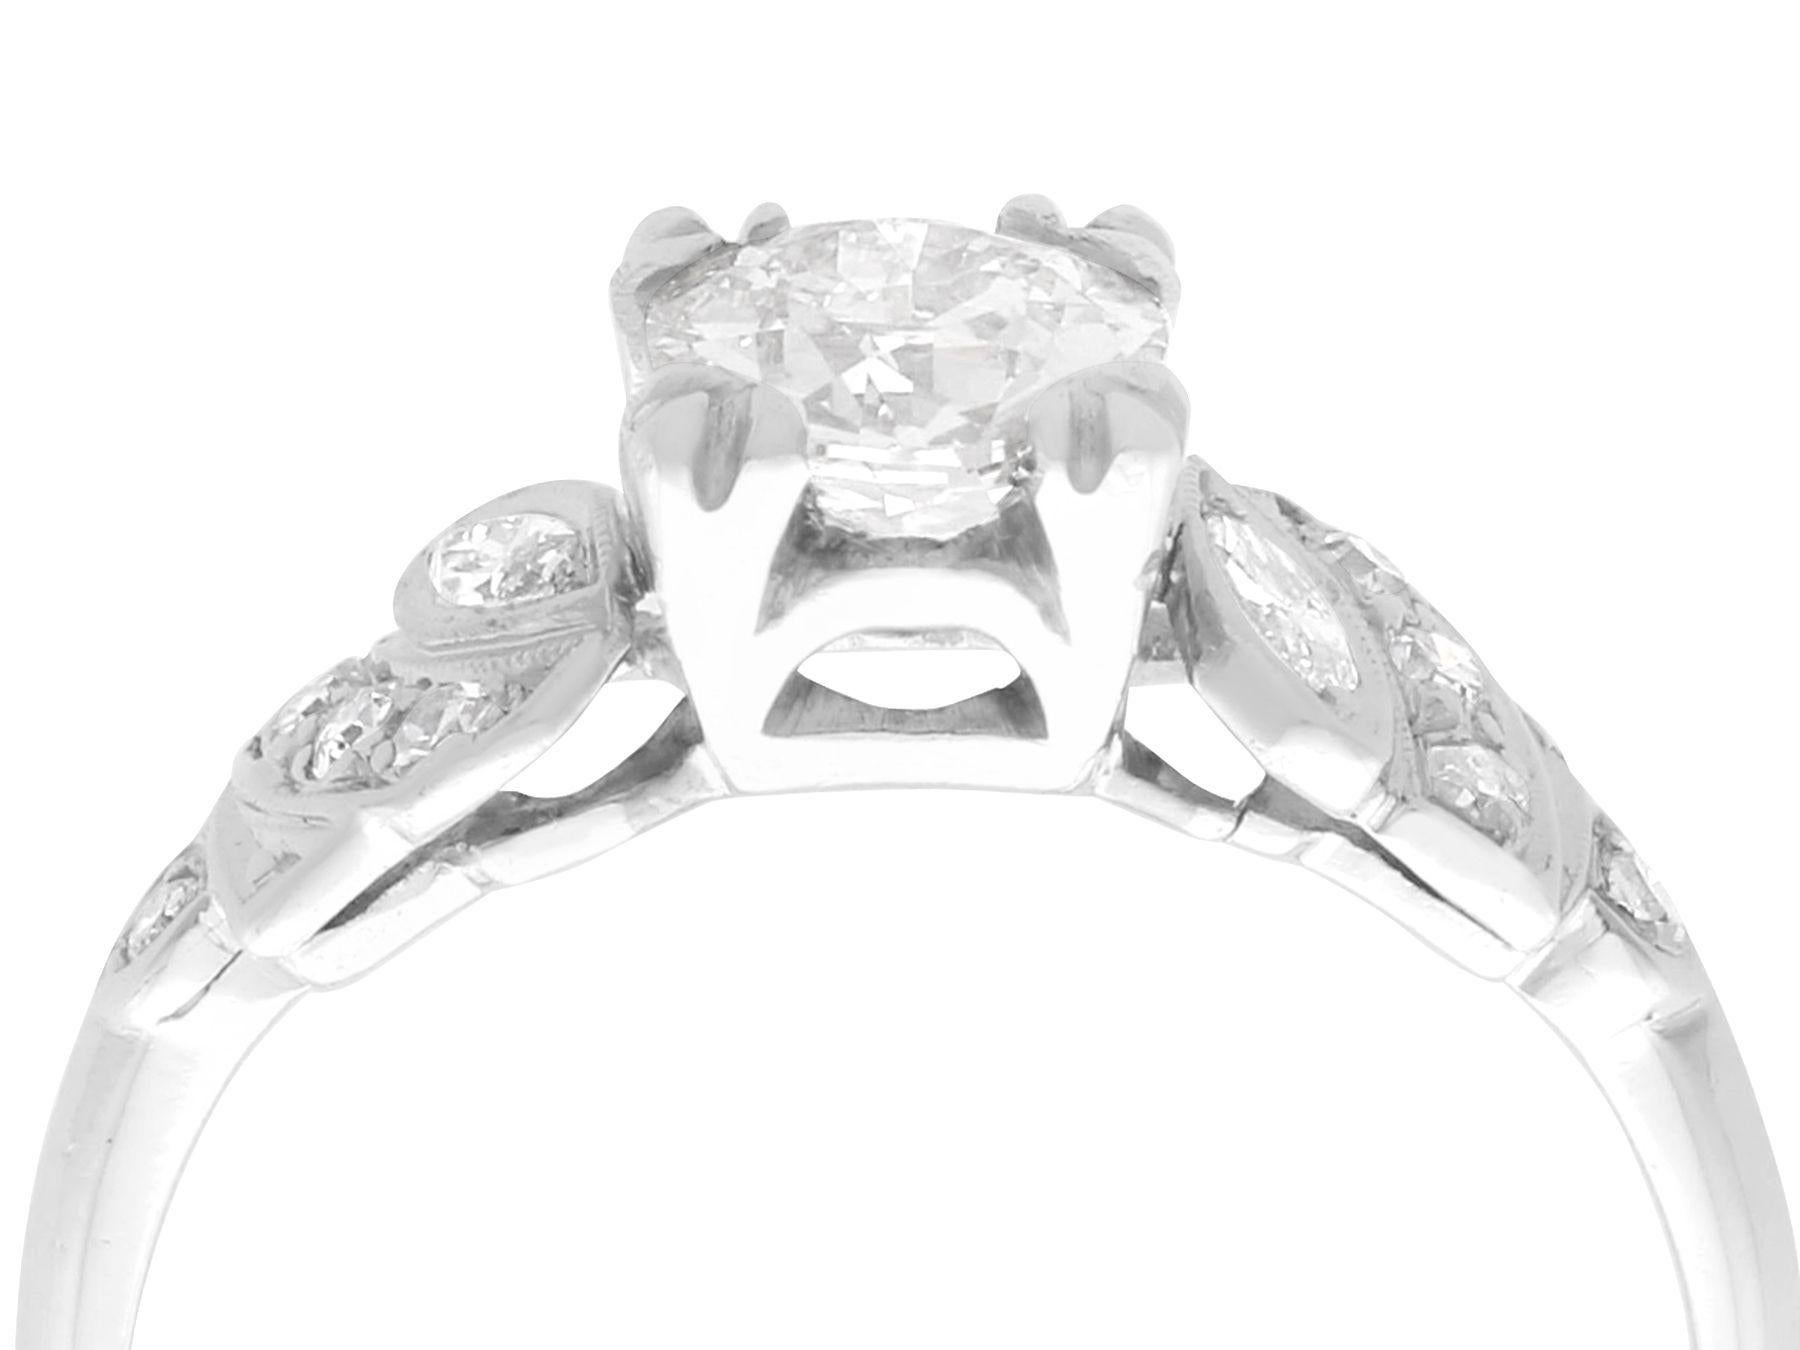 A stunning, fine and impressive 1.24 carat diamond and platinum solitaire engagement ring; part of our diverse estate jewelry collections. 

This stunning, fine and impressive antique diamond ring has been crafted in platinum.

The pierced decorated